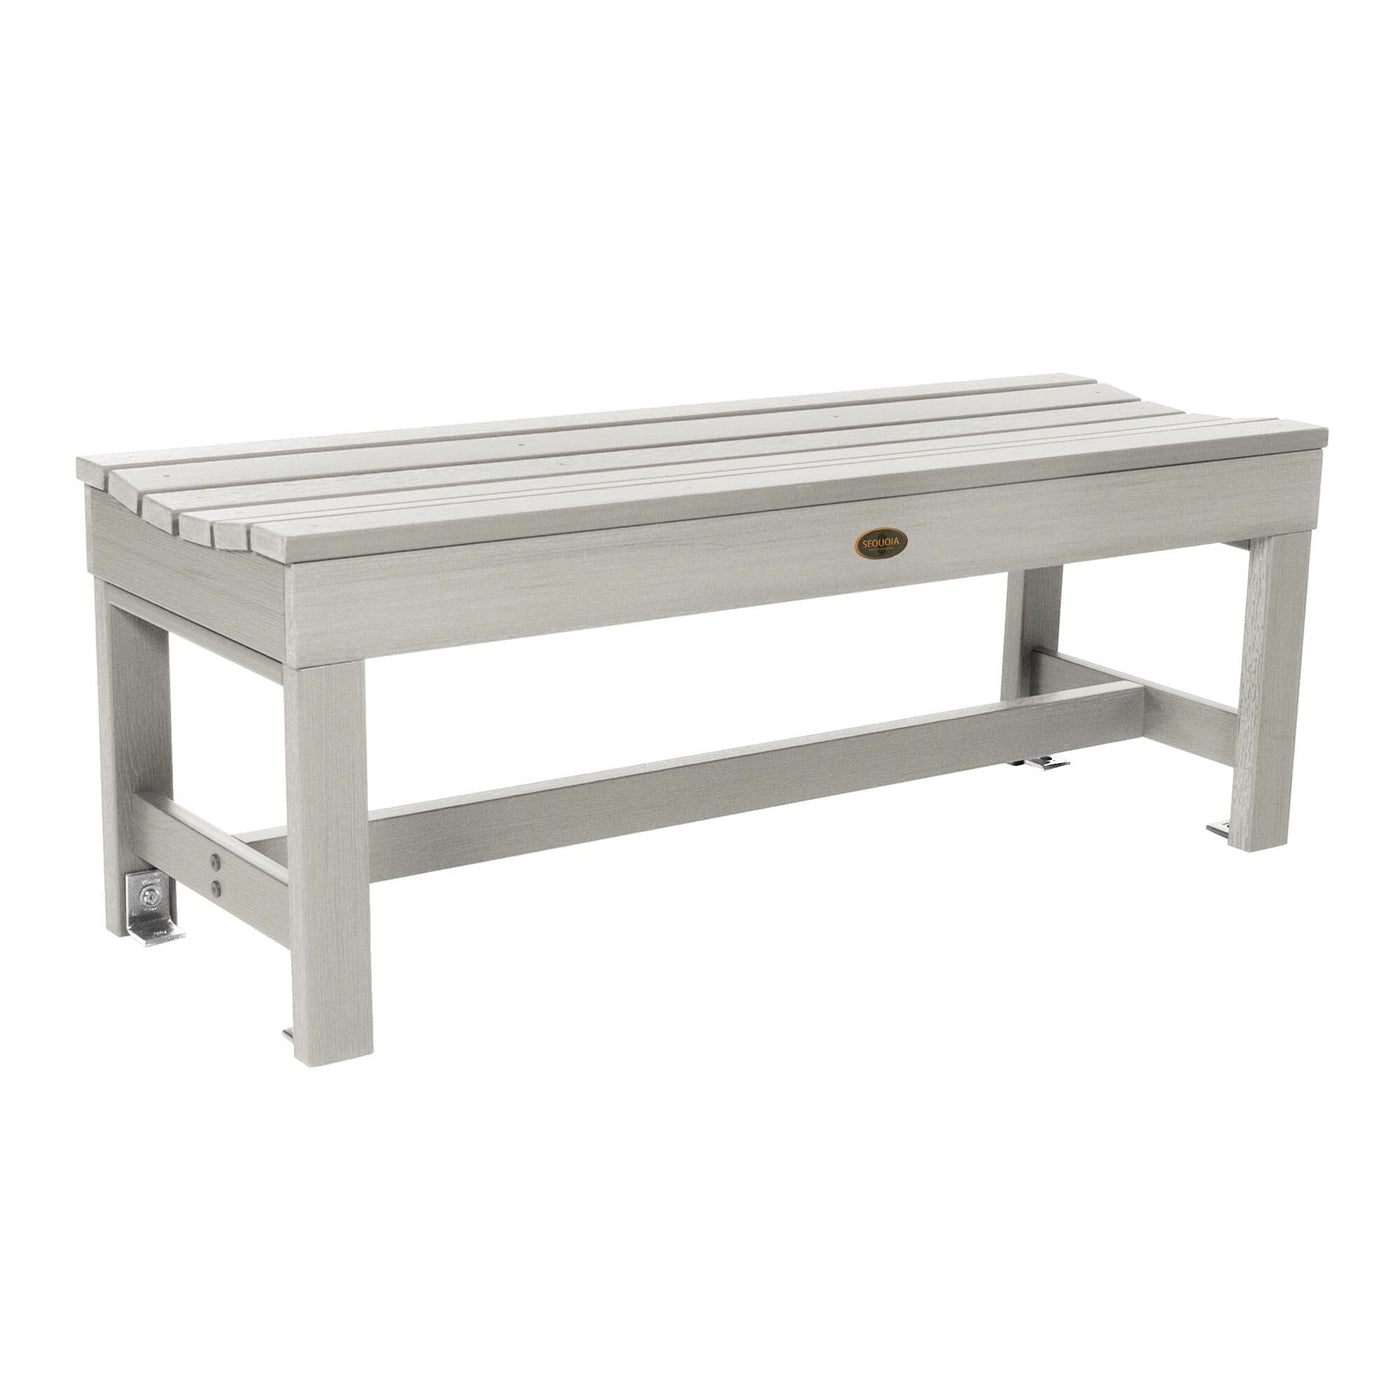 Commercial Grade "Weldon" 4ft Backless Bench Bench Sequoia Professional Harbor Gray 